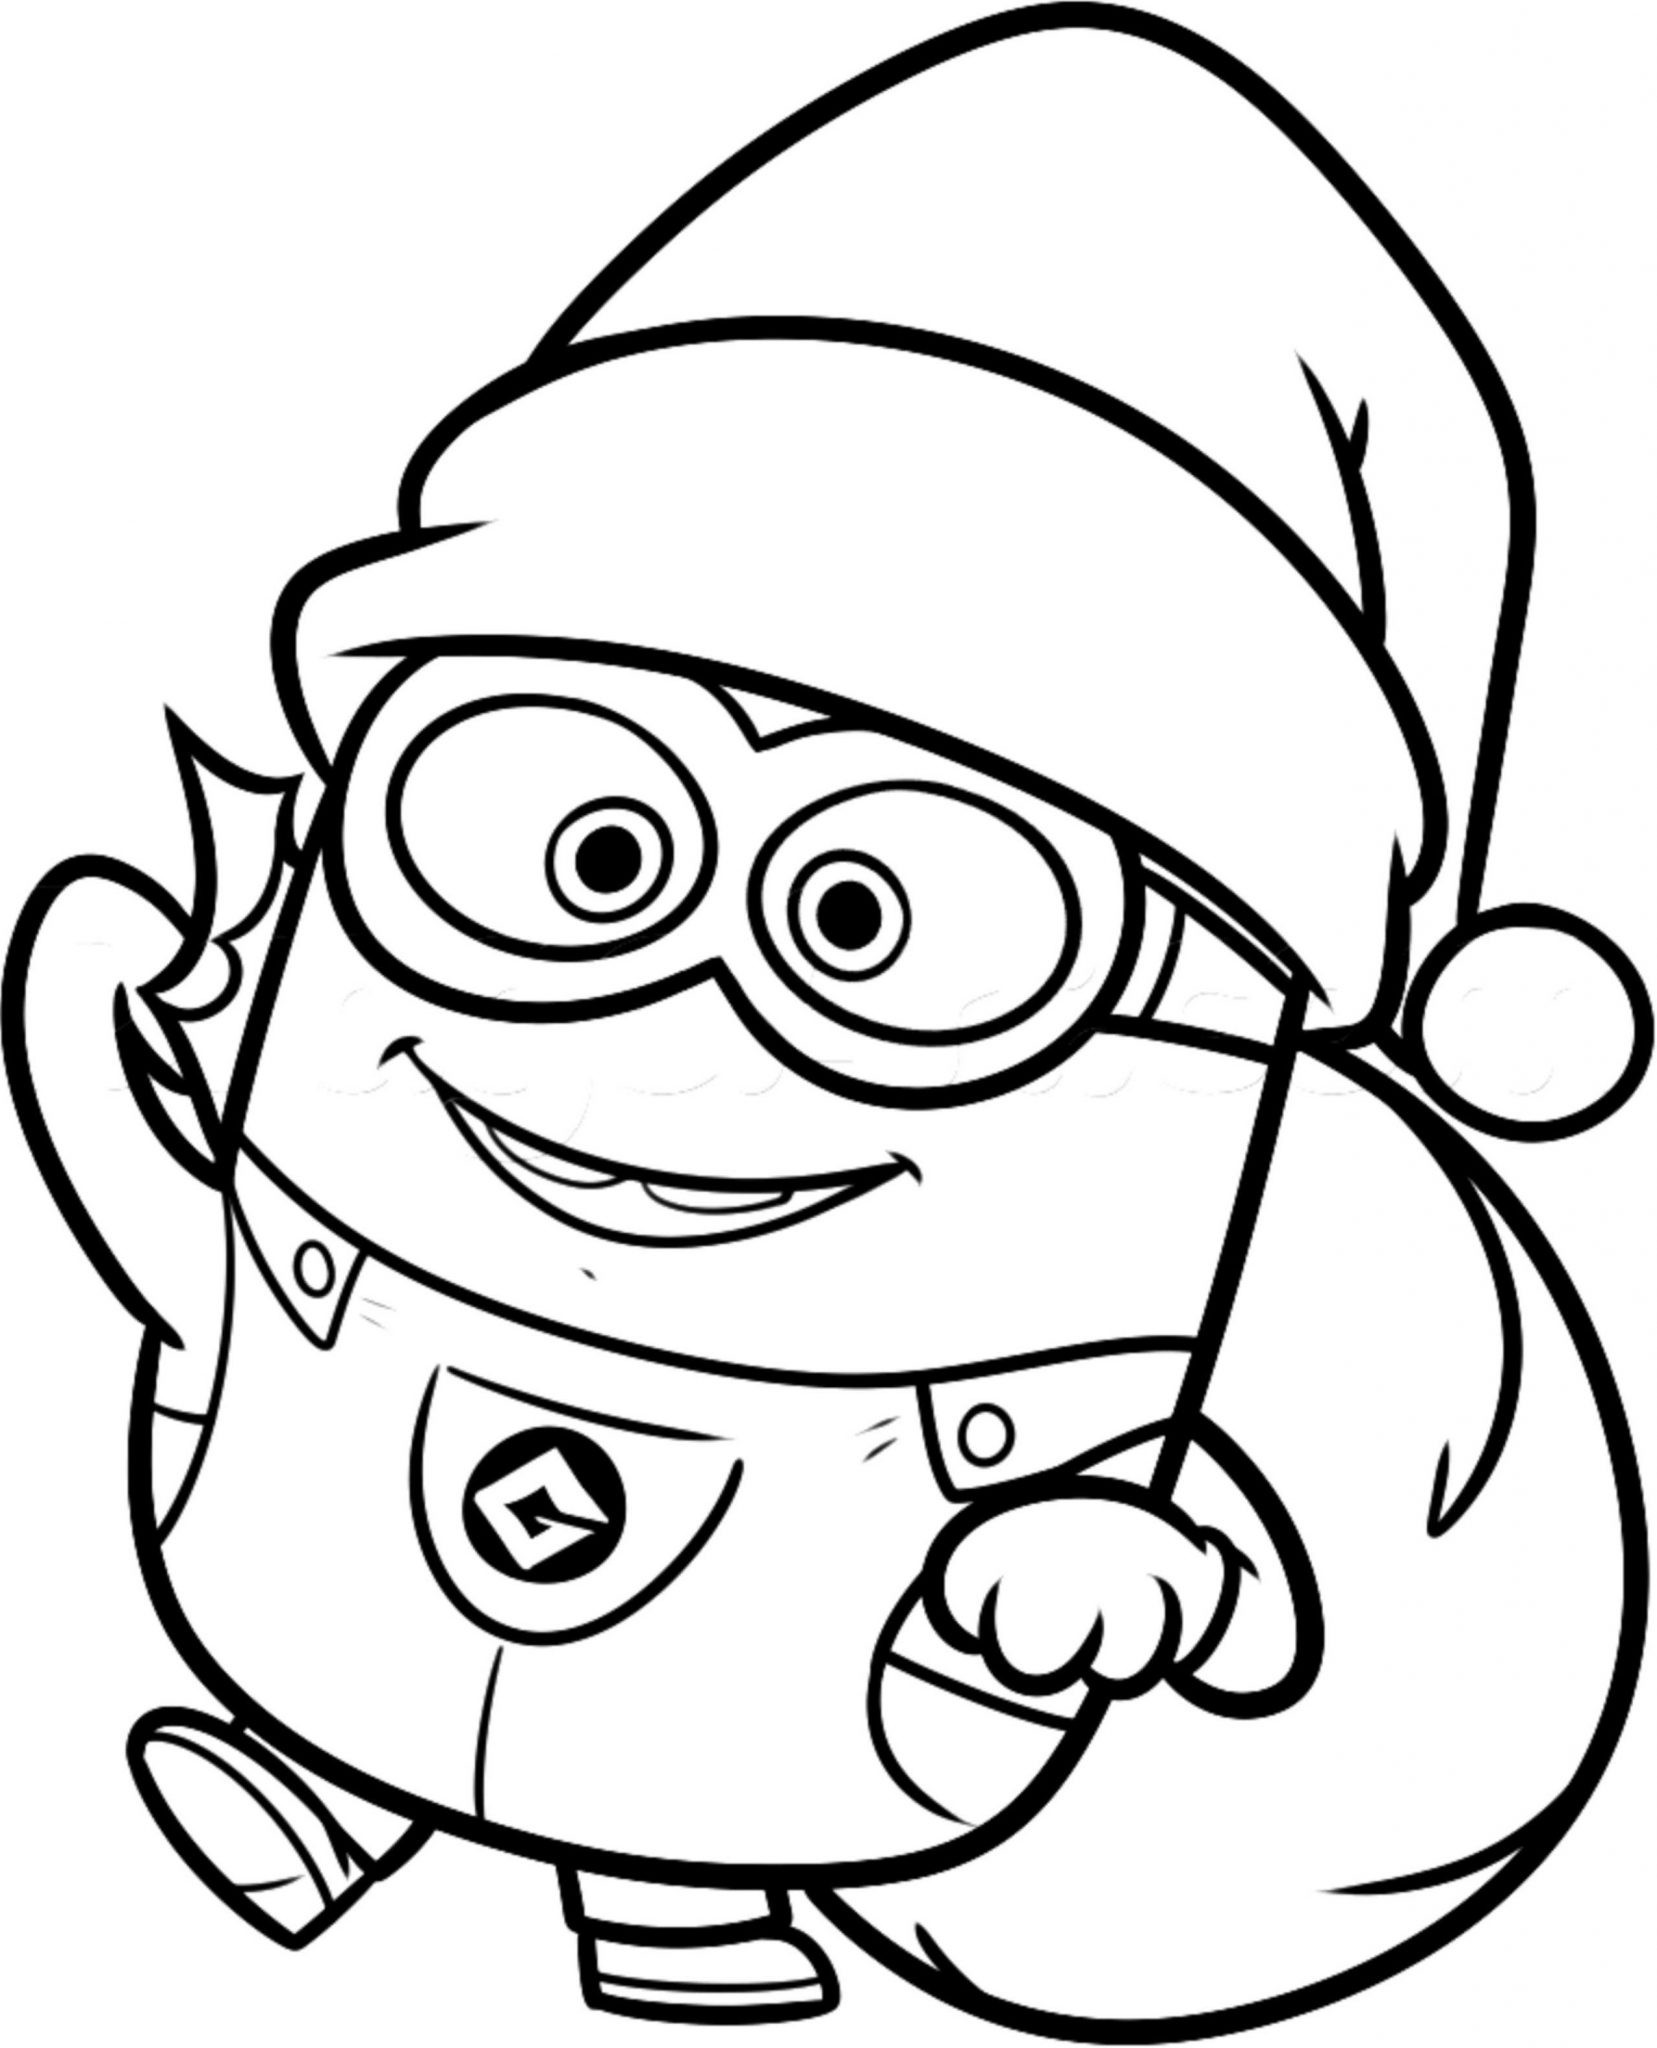 Coloring Pages For Kids Minion
 Print & Download Minion Coloring Pages for Kids to Have